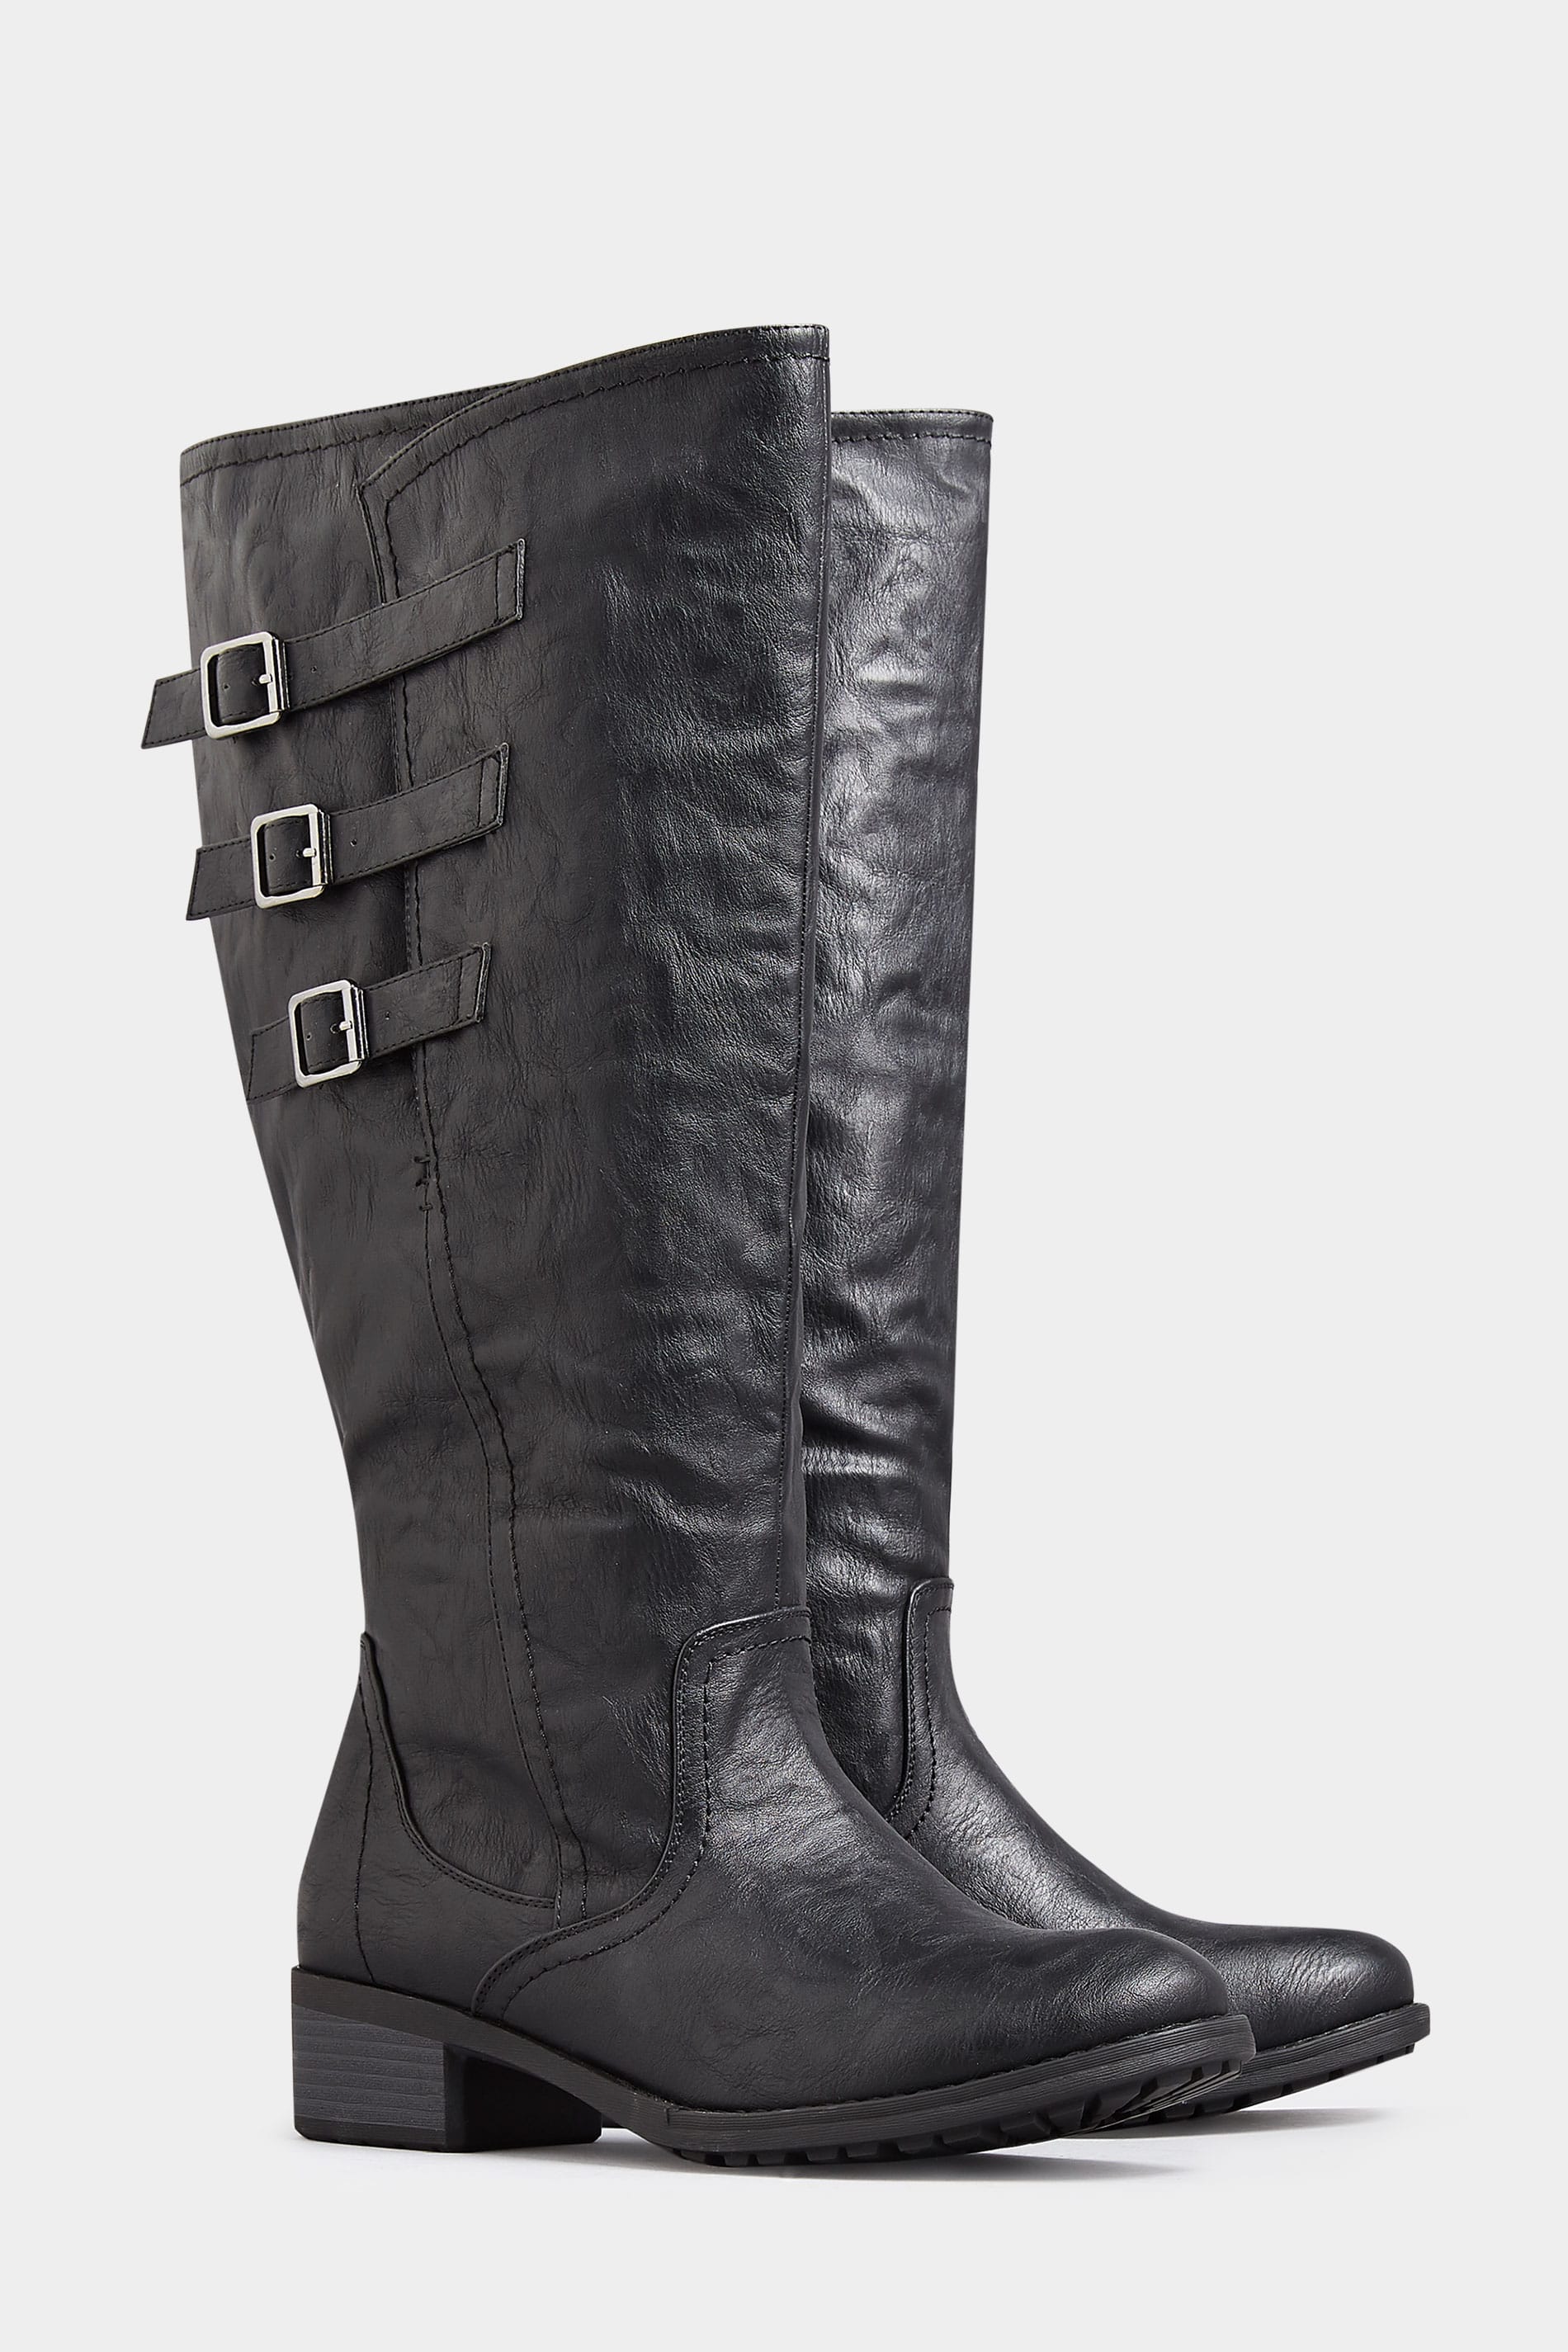 Black Knee High Boots In Extra Wide Fit With Adjustable Straps 1